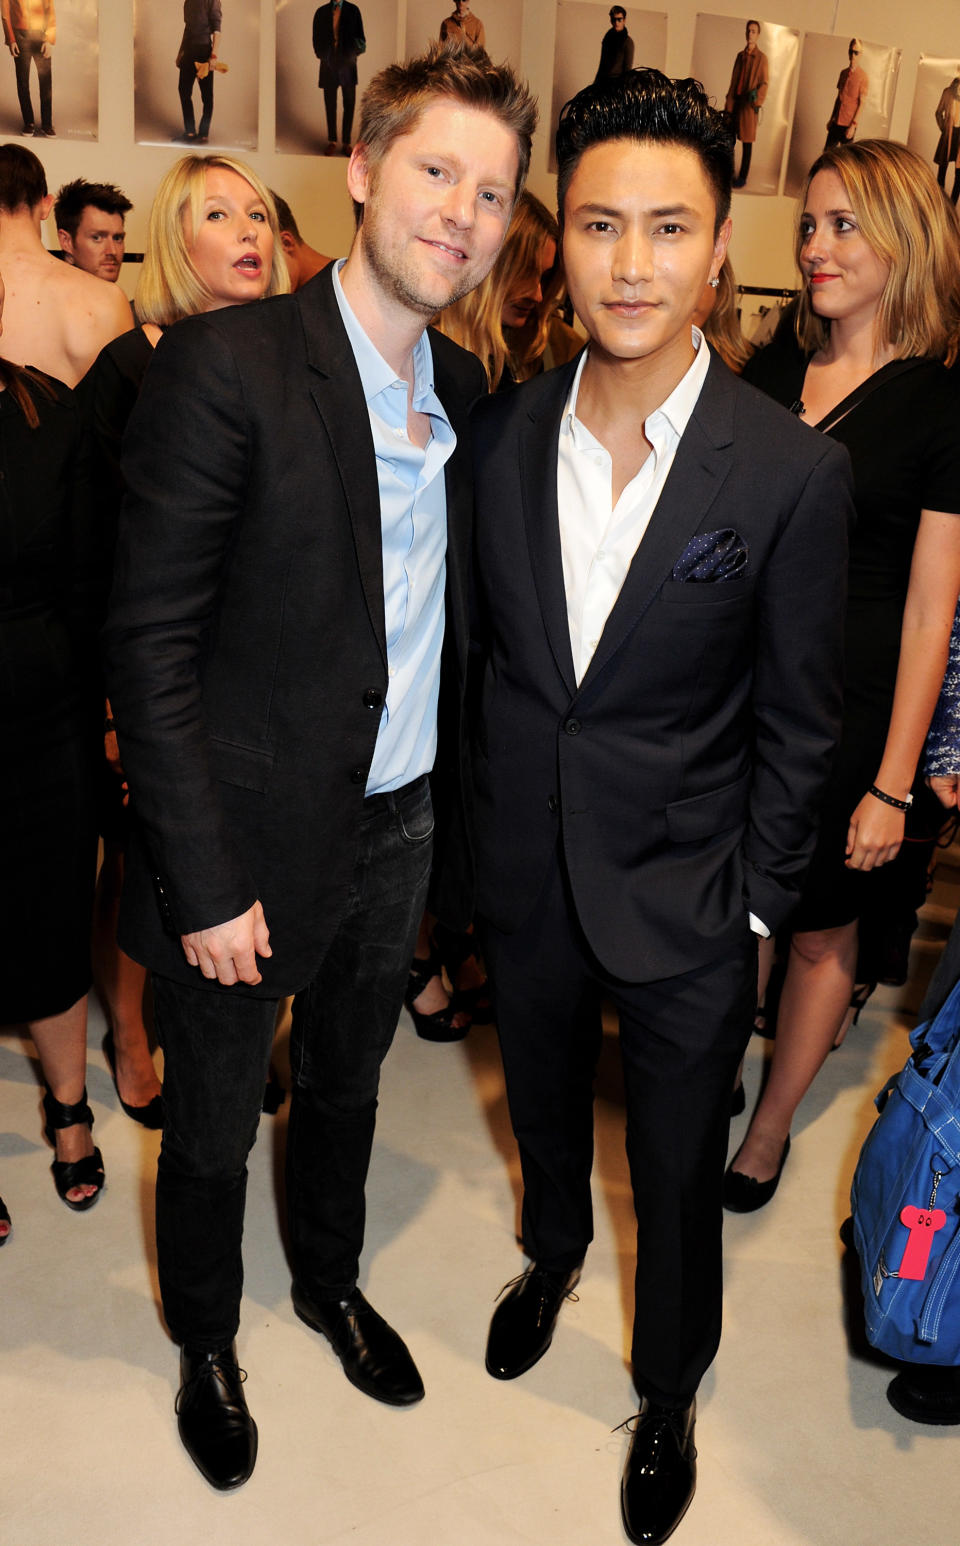 Burberry former Chief Creative Officer Christopher Bailey and Chen Kun